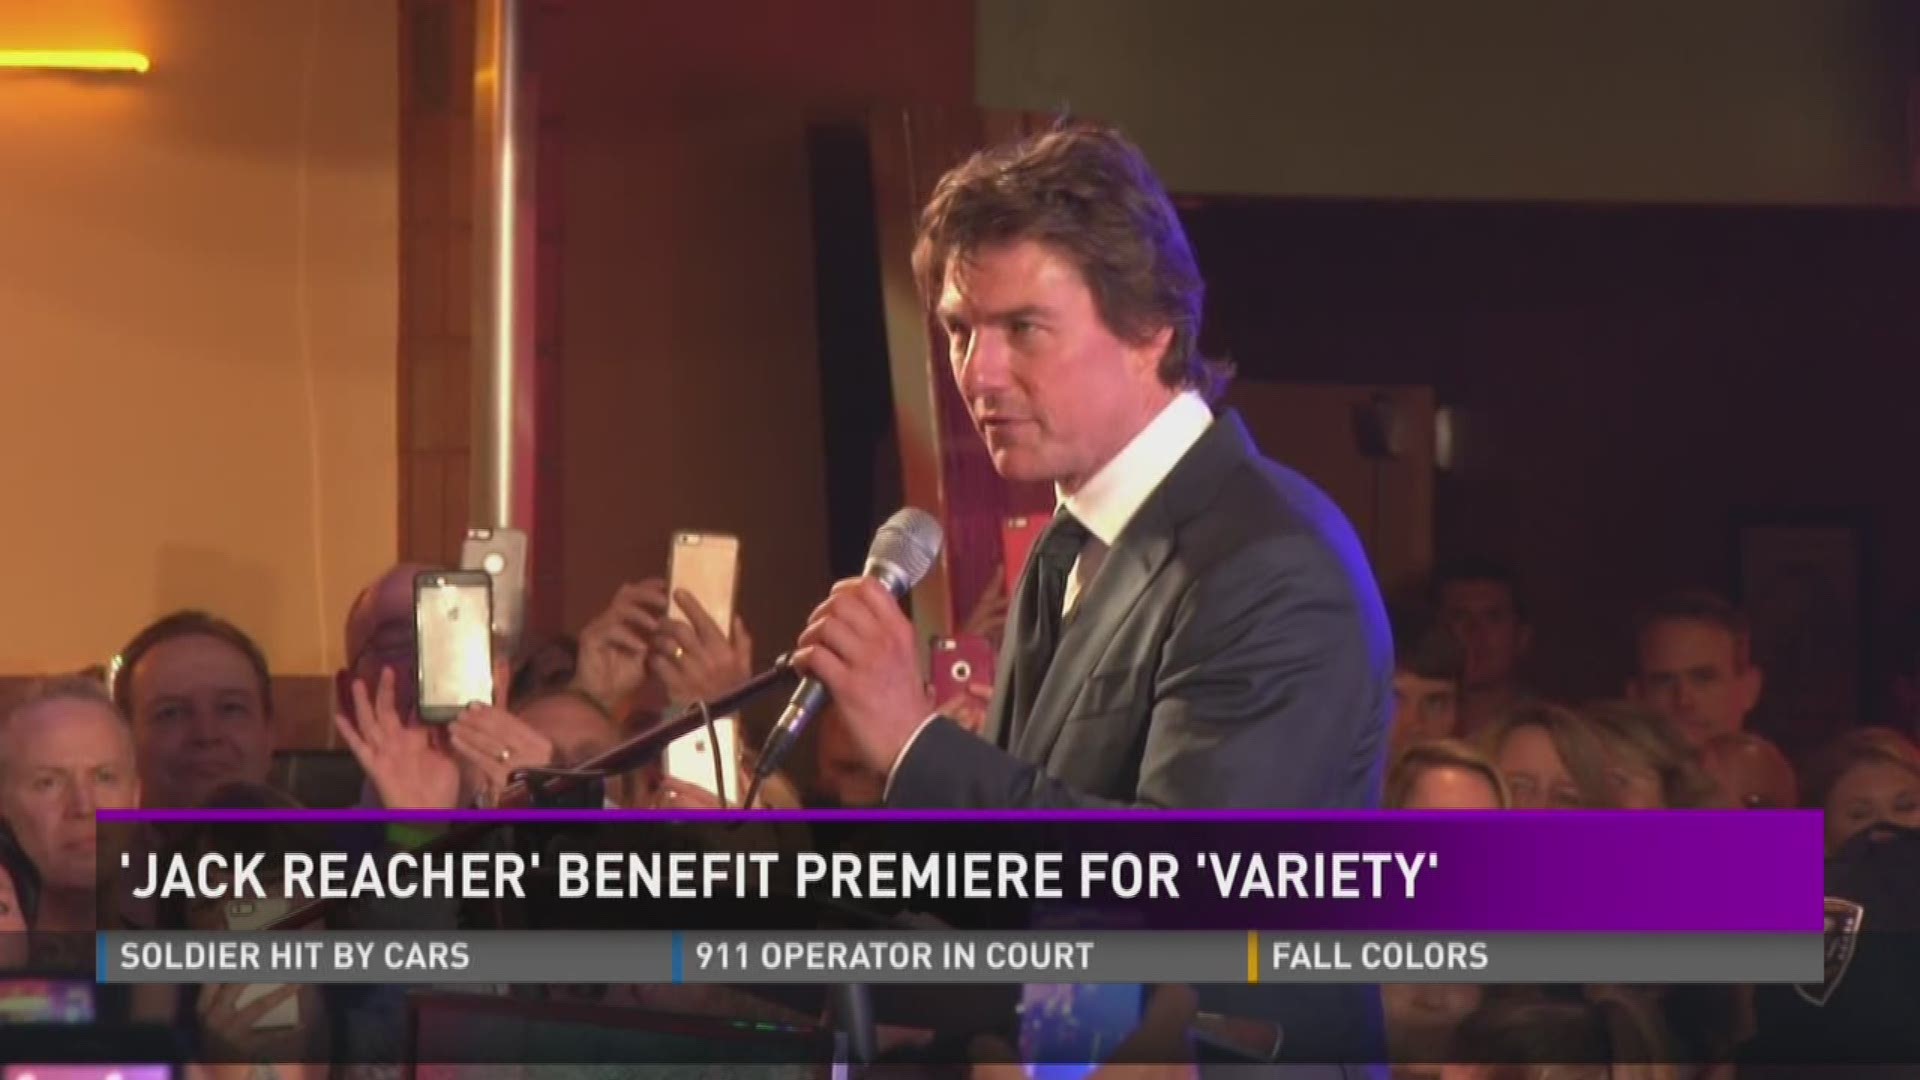 Oct. 17, 2016: Tom Cruise attended a benefit premiere for his new "Jack Reacher" movie in Knoxville to benefit Variety children's charity.